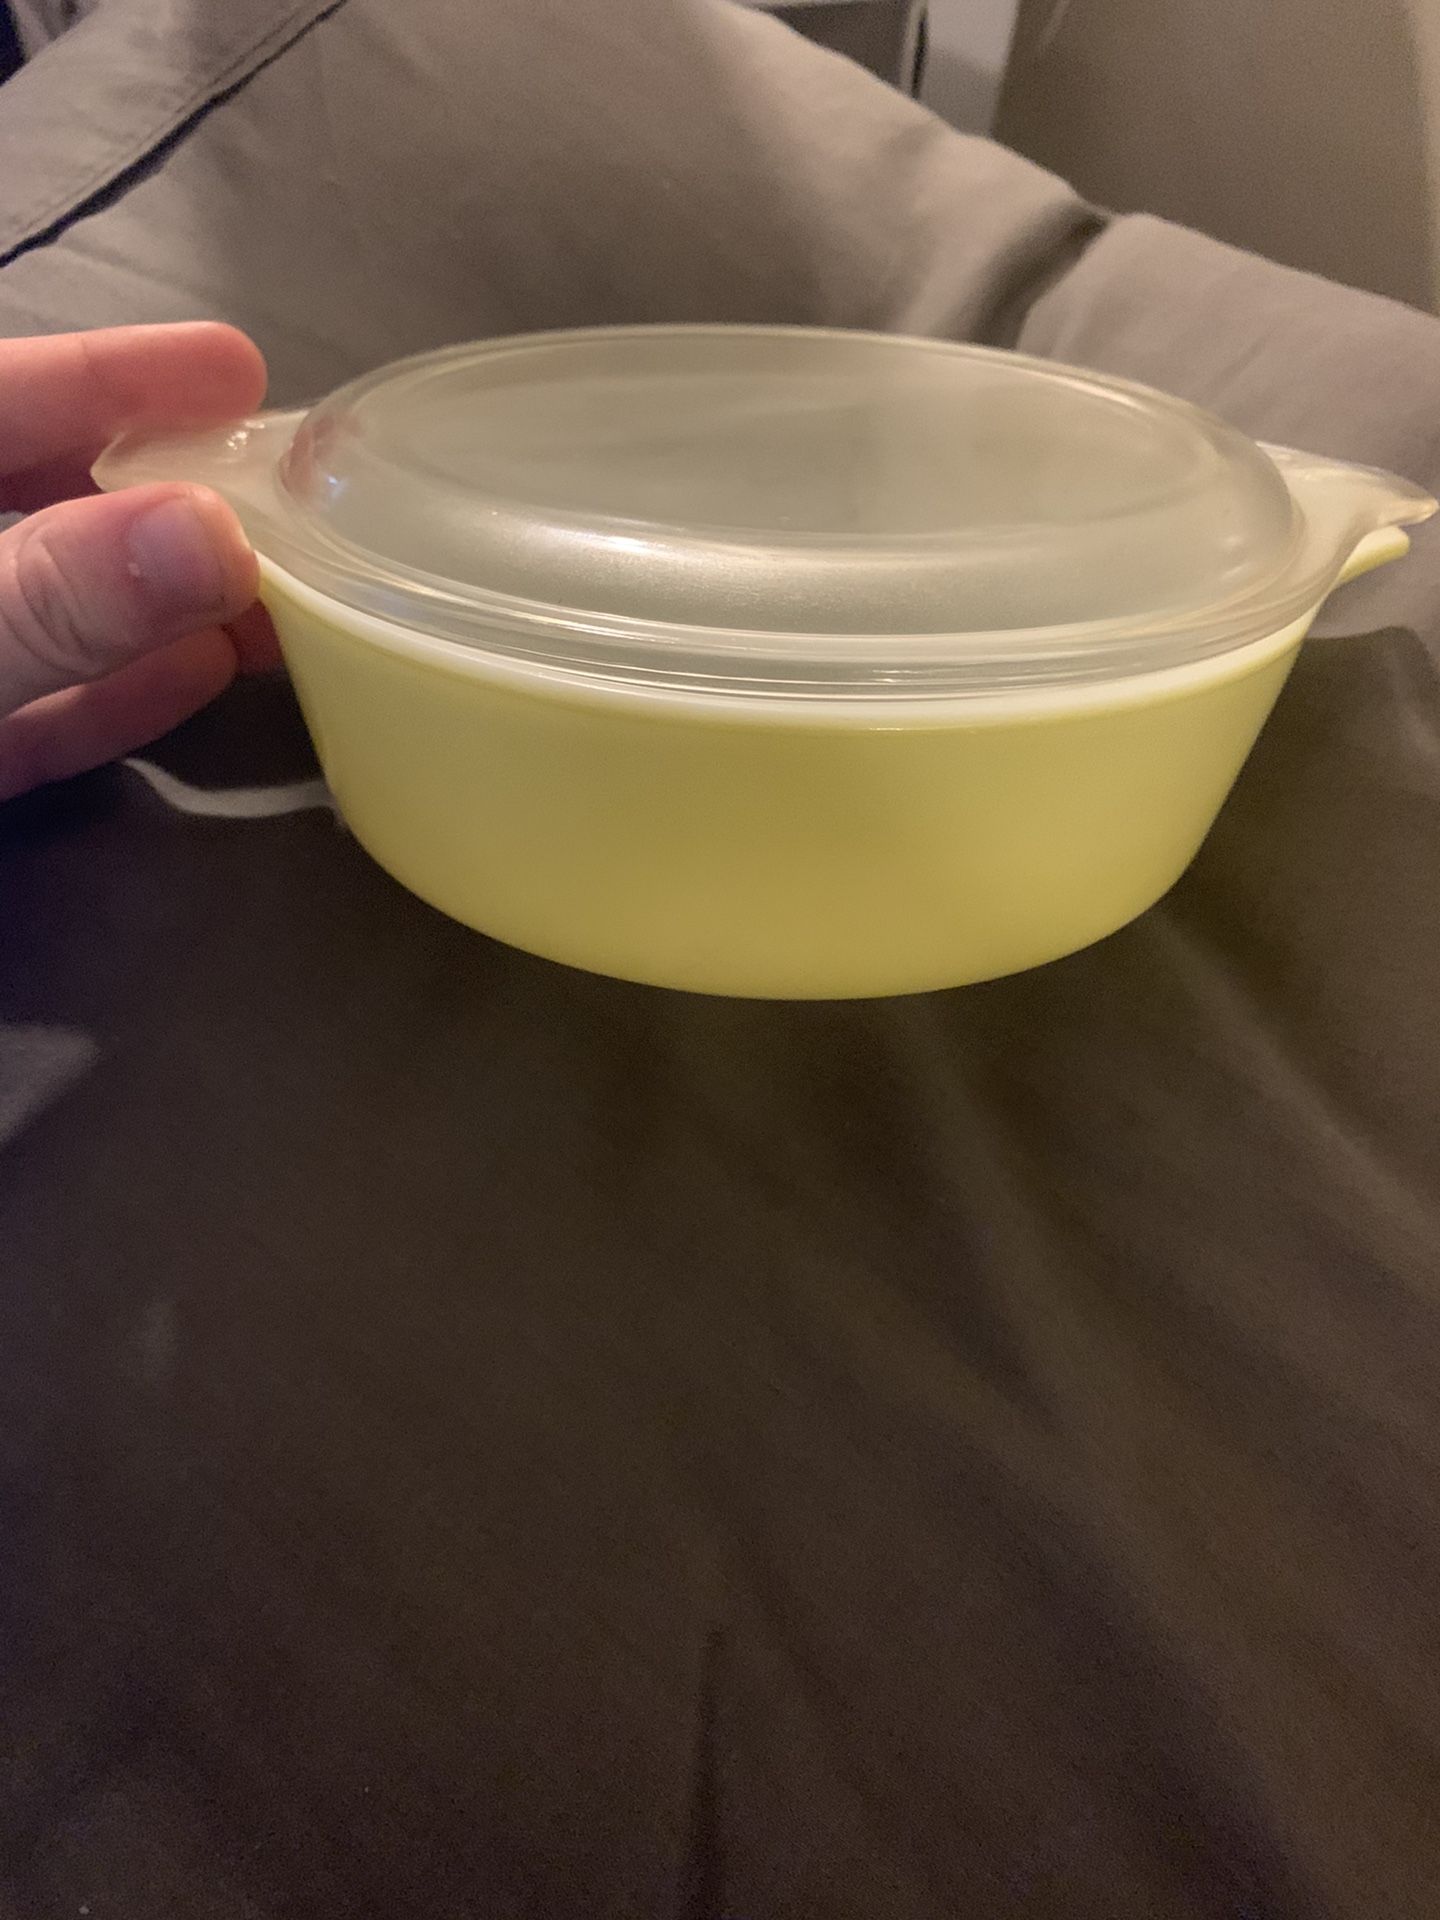 Vintage Pyrex casserole dish with matching lid